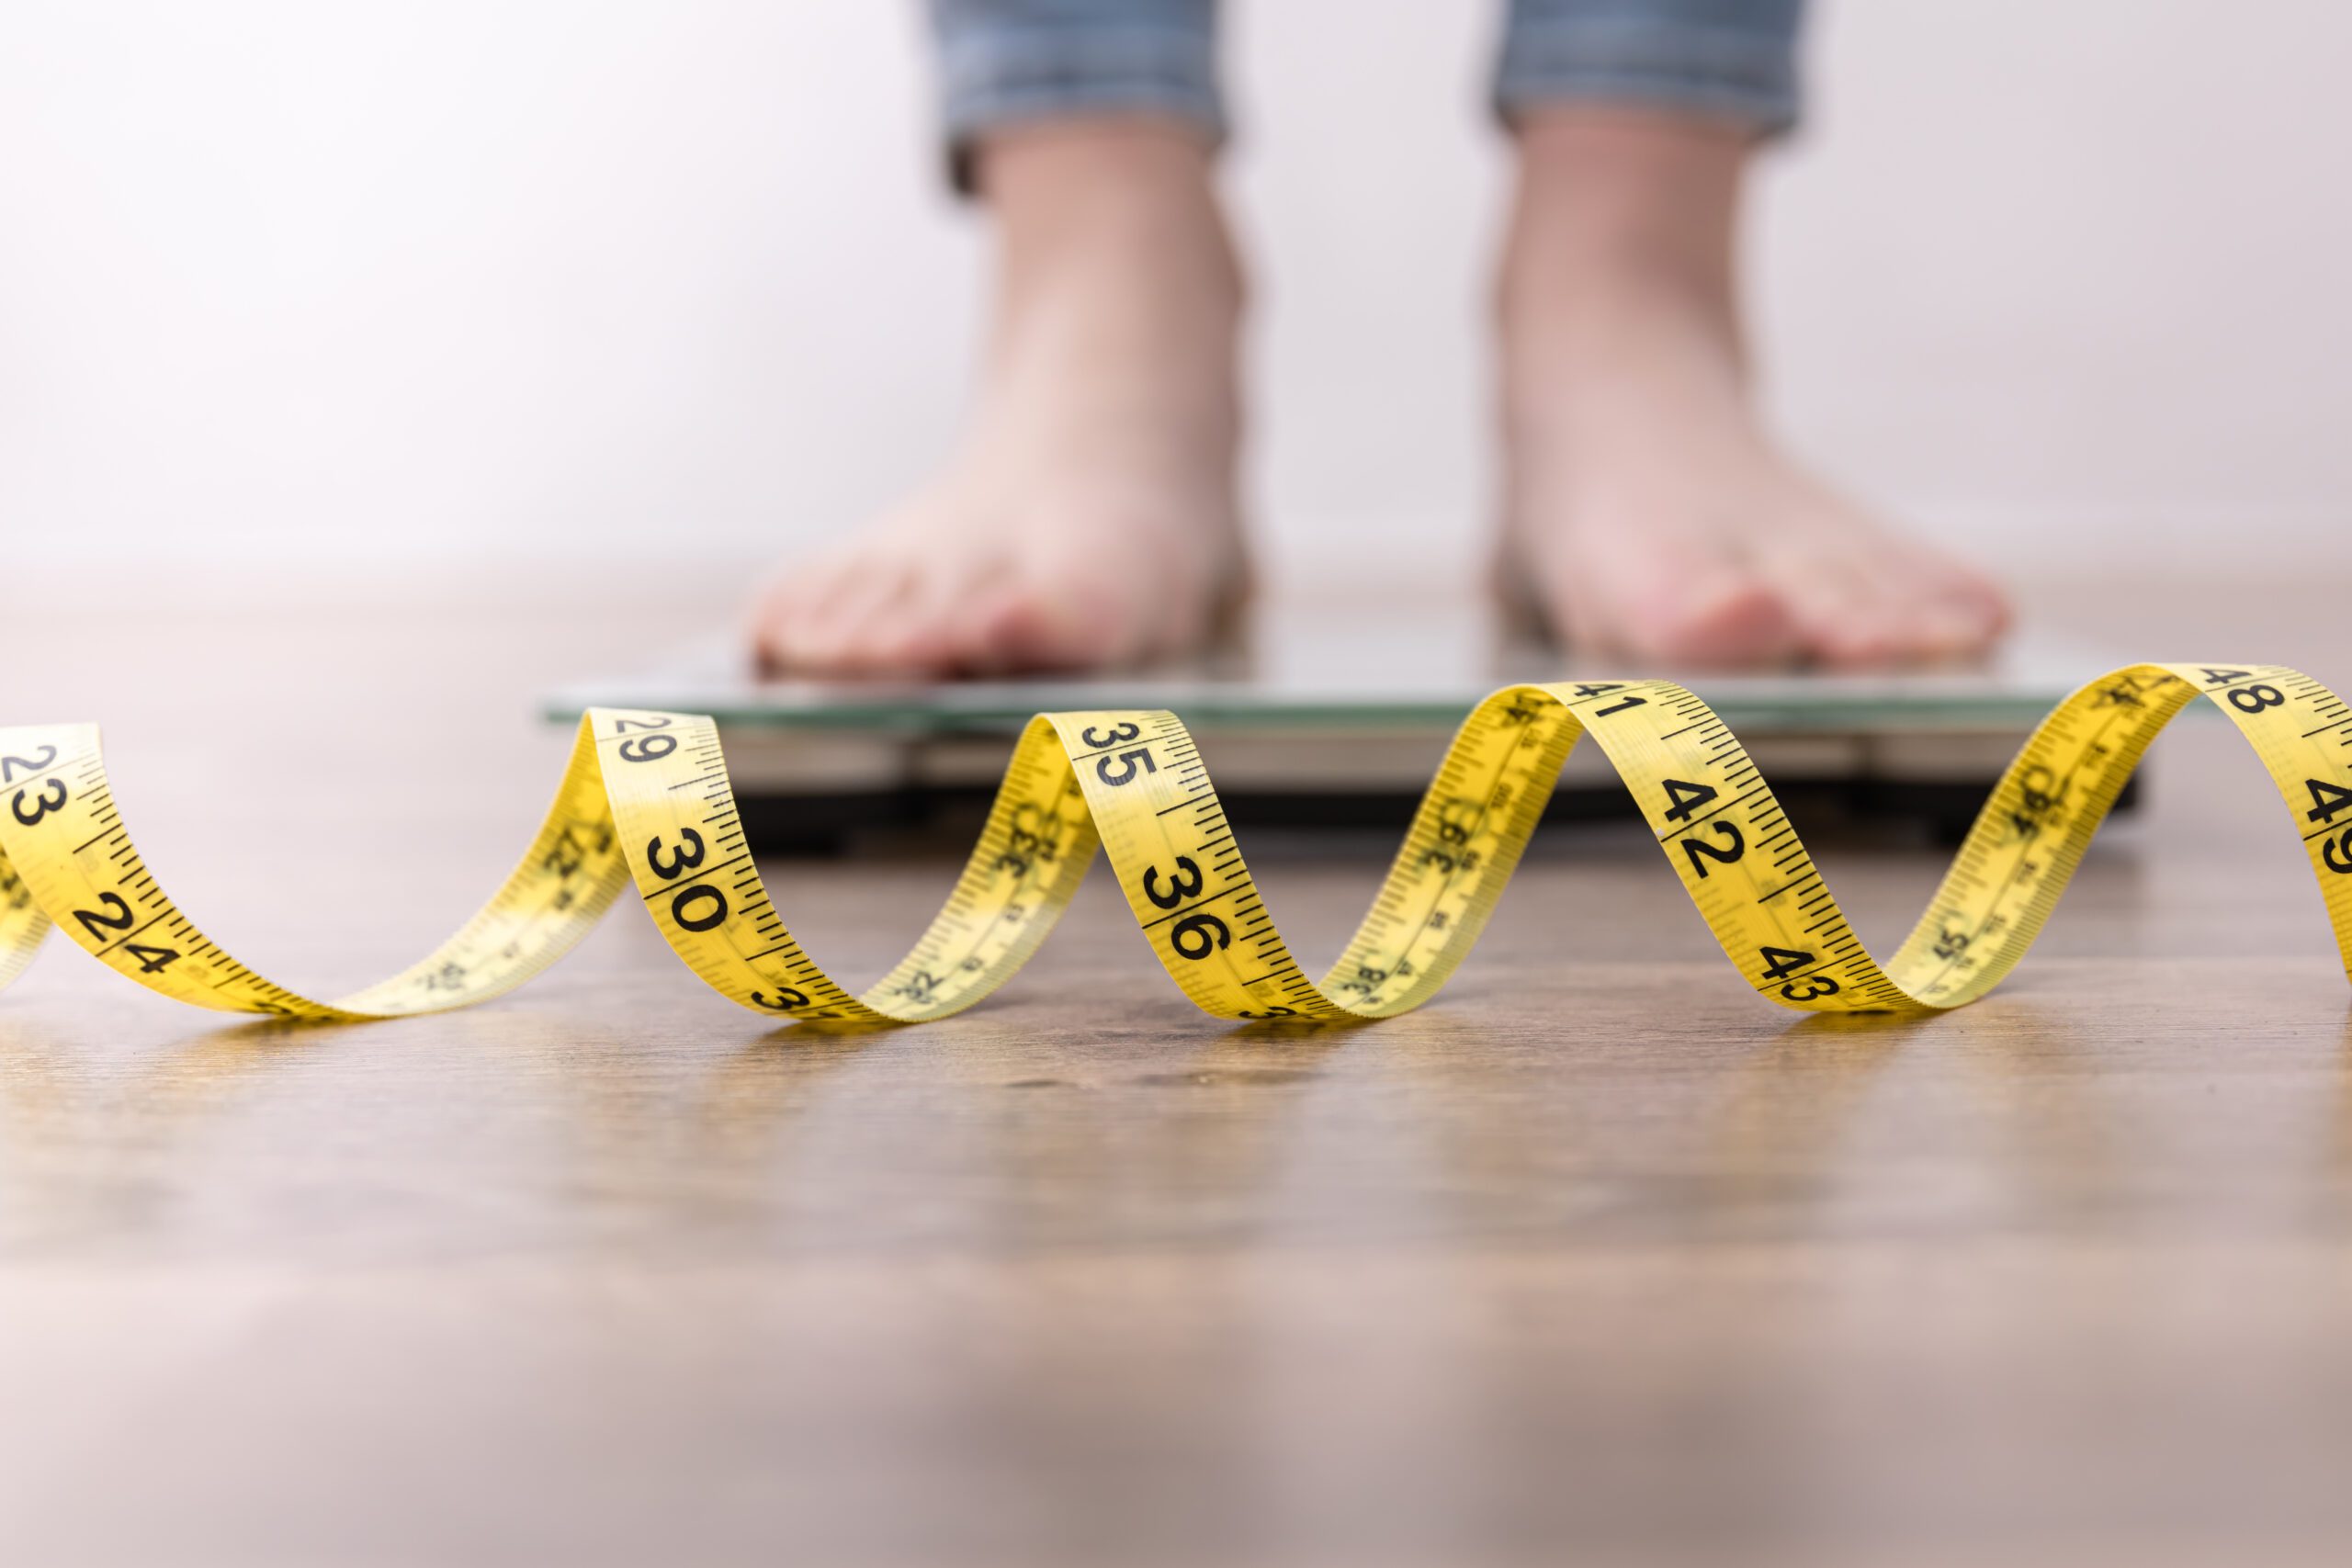 Hims & Hers Gets Into Weight Loss Treatment - MedCity News